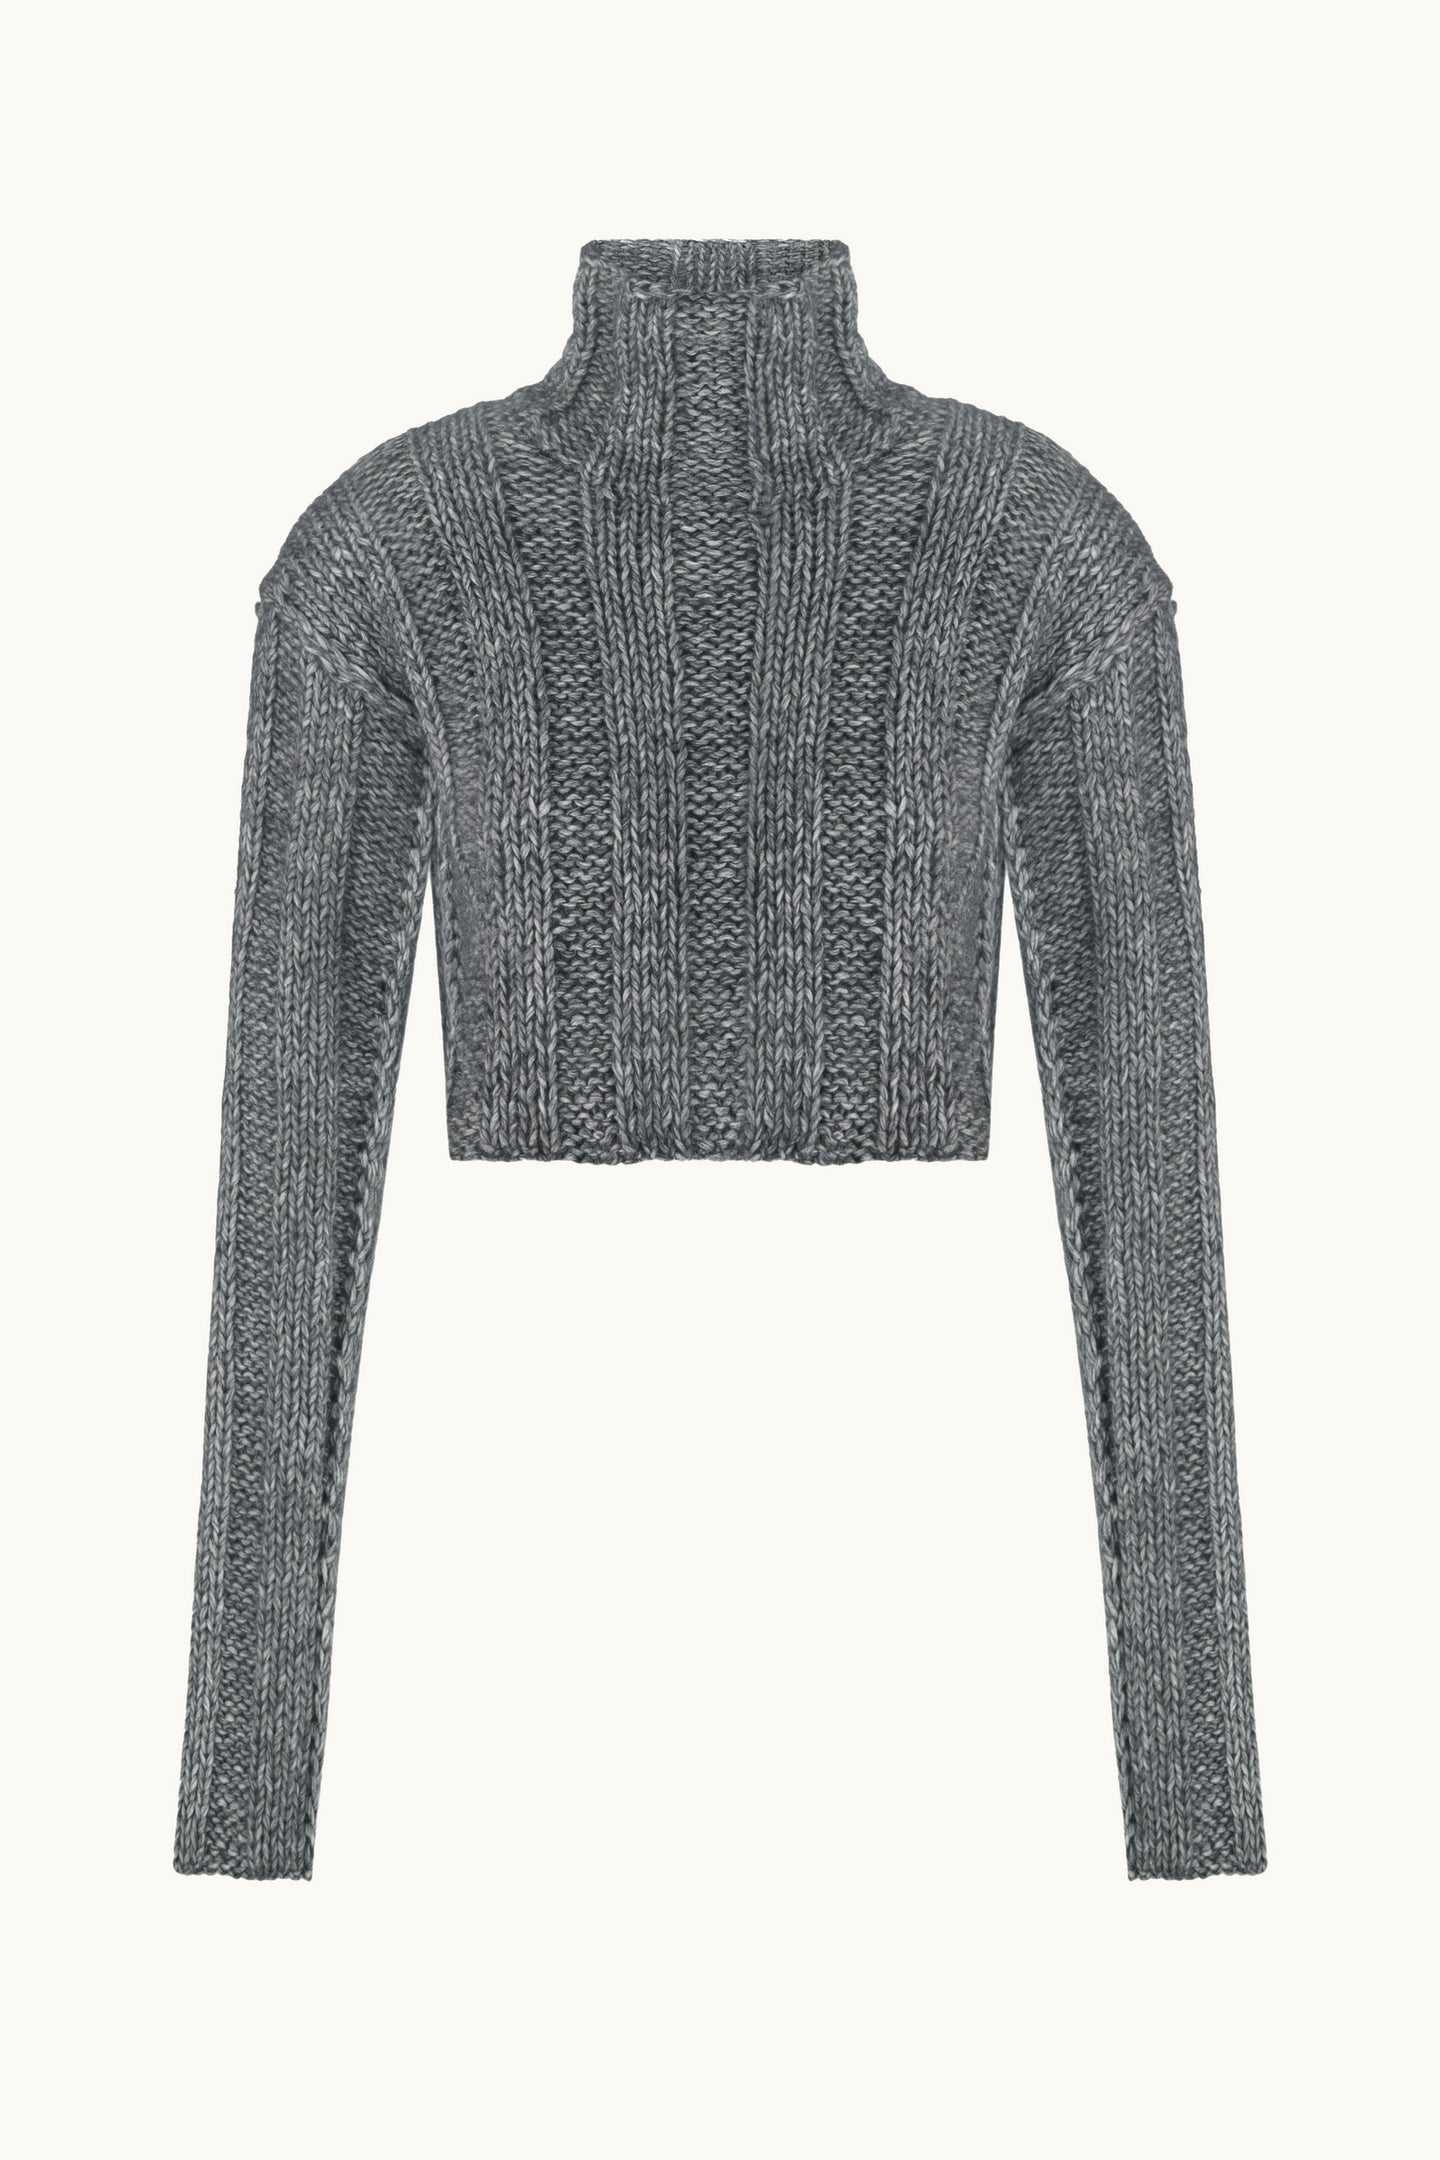 Ksena grey sweater front view